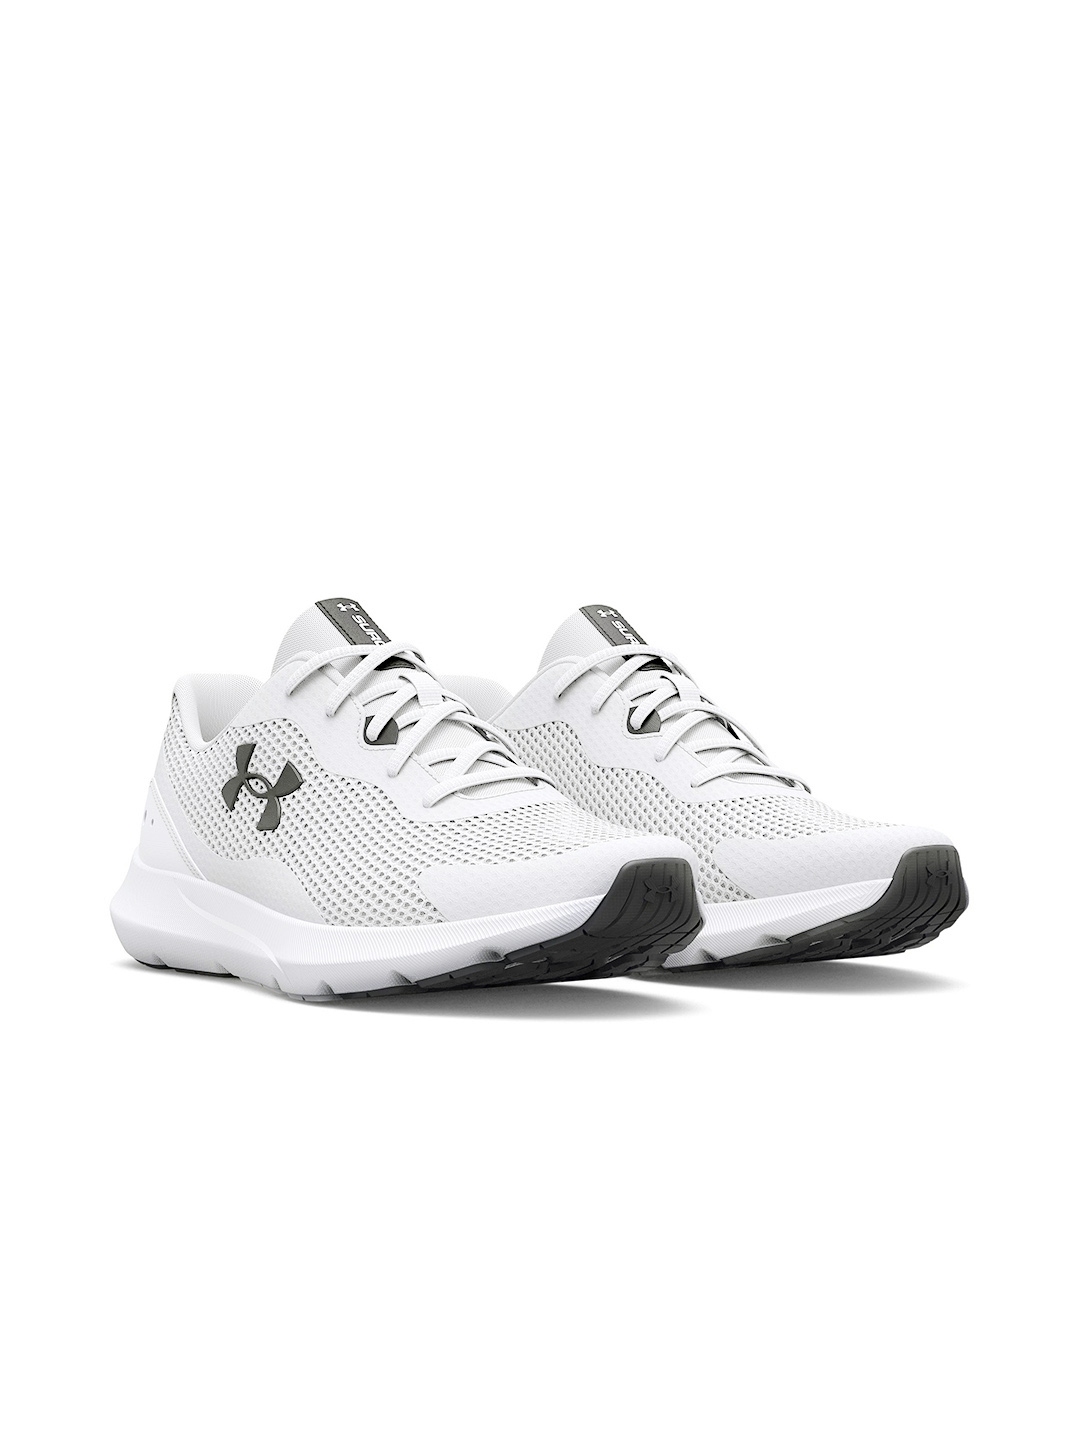 Under Armour Charged Shoes for Men, Women & Kids in Amazing Offers